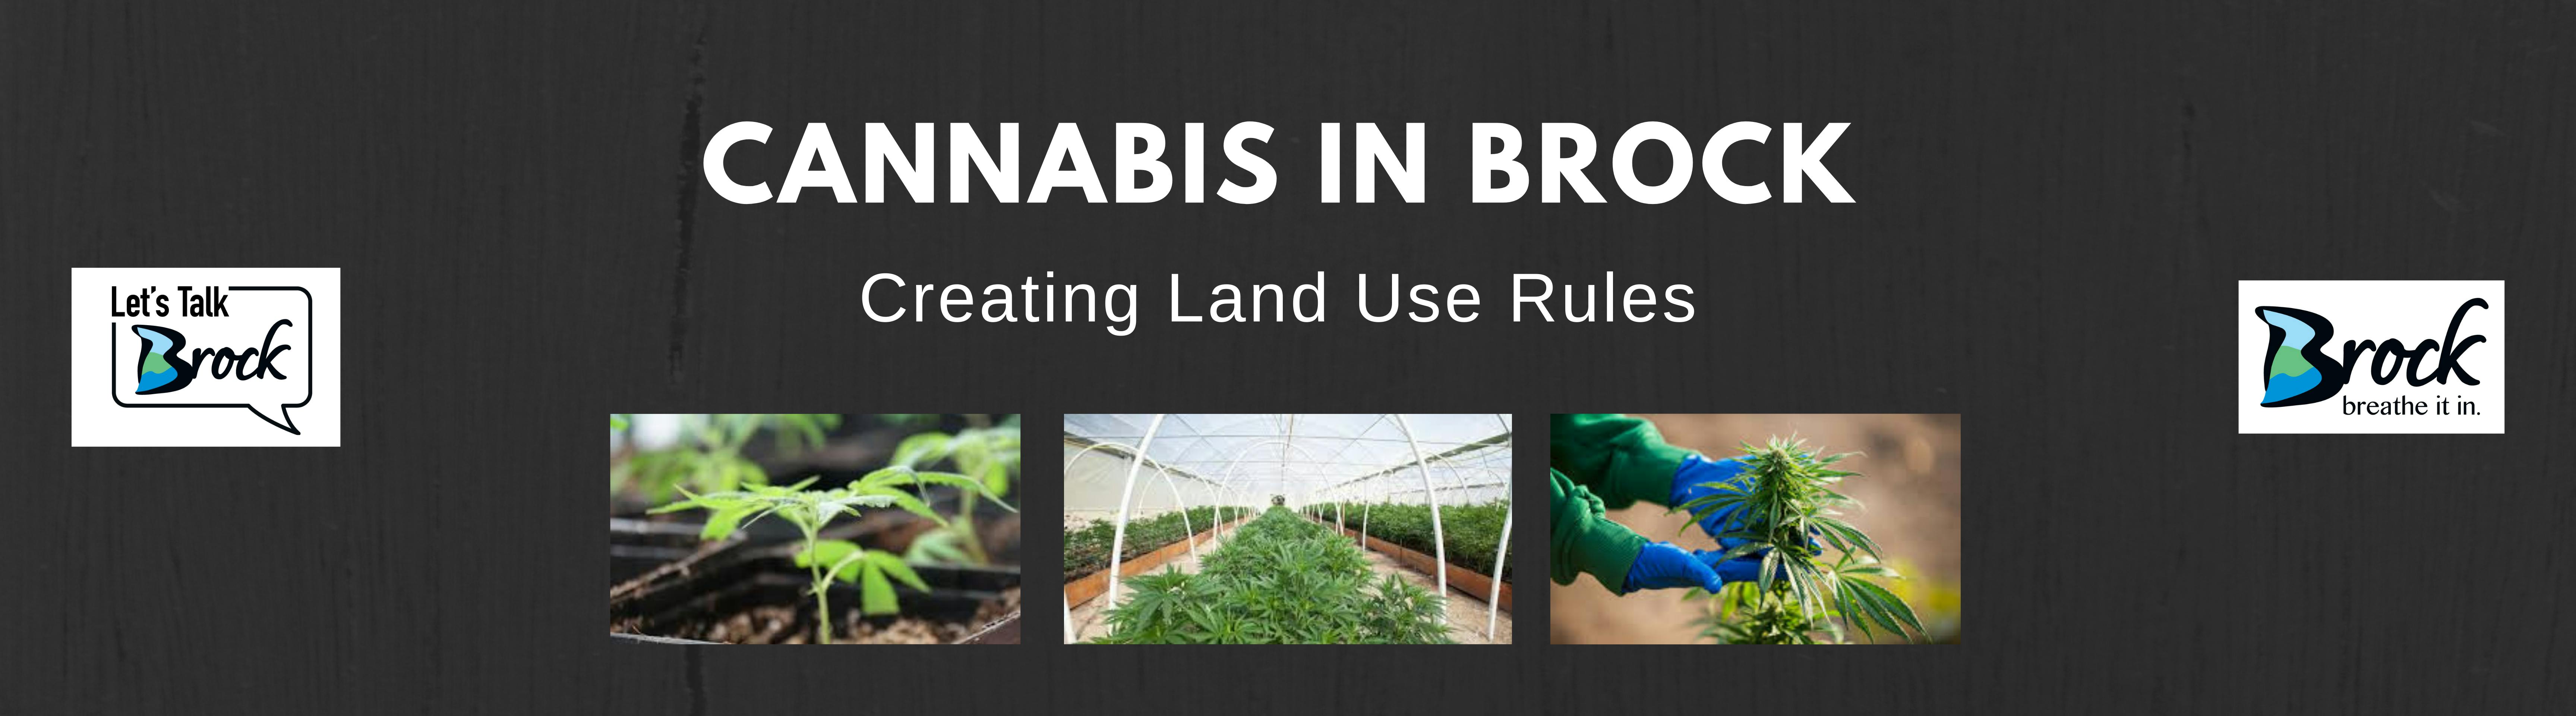 Image of Cannabis Plants, title and Brock logo